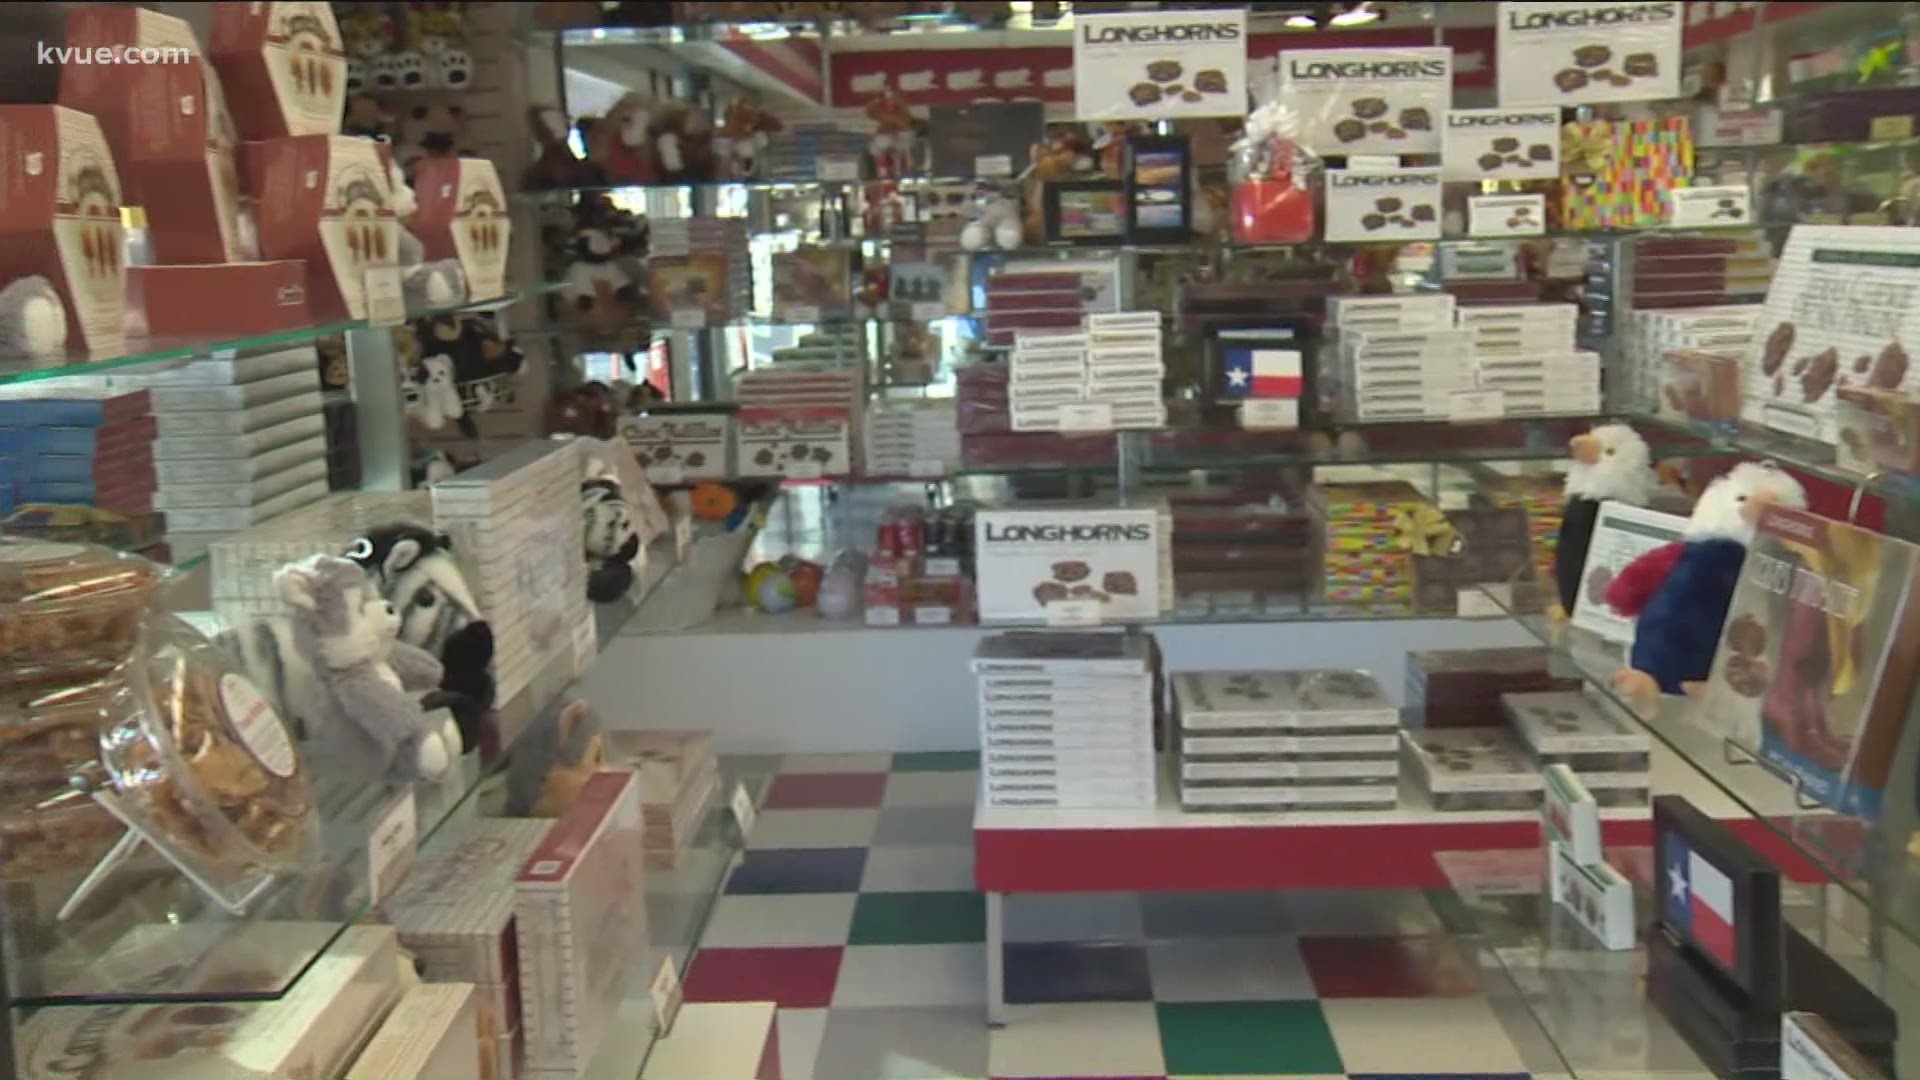 For Keep Austin Local this week, we're satisfying our sweet tooth at Lammes Candies.